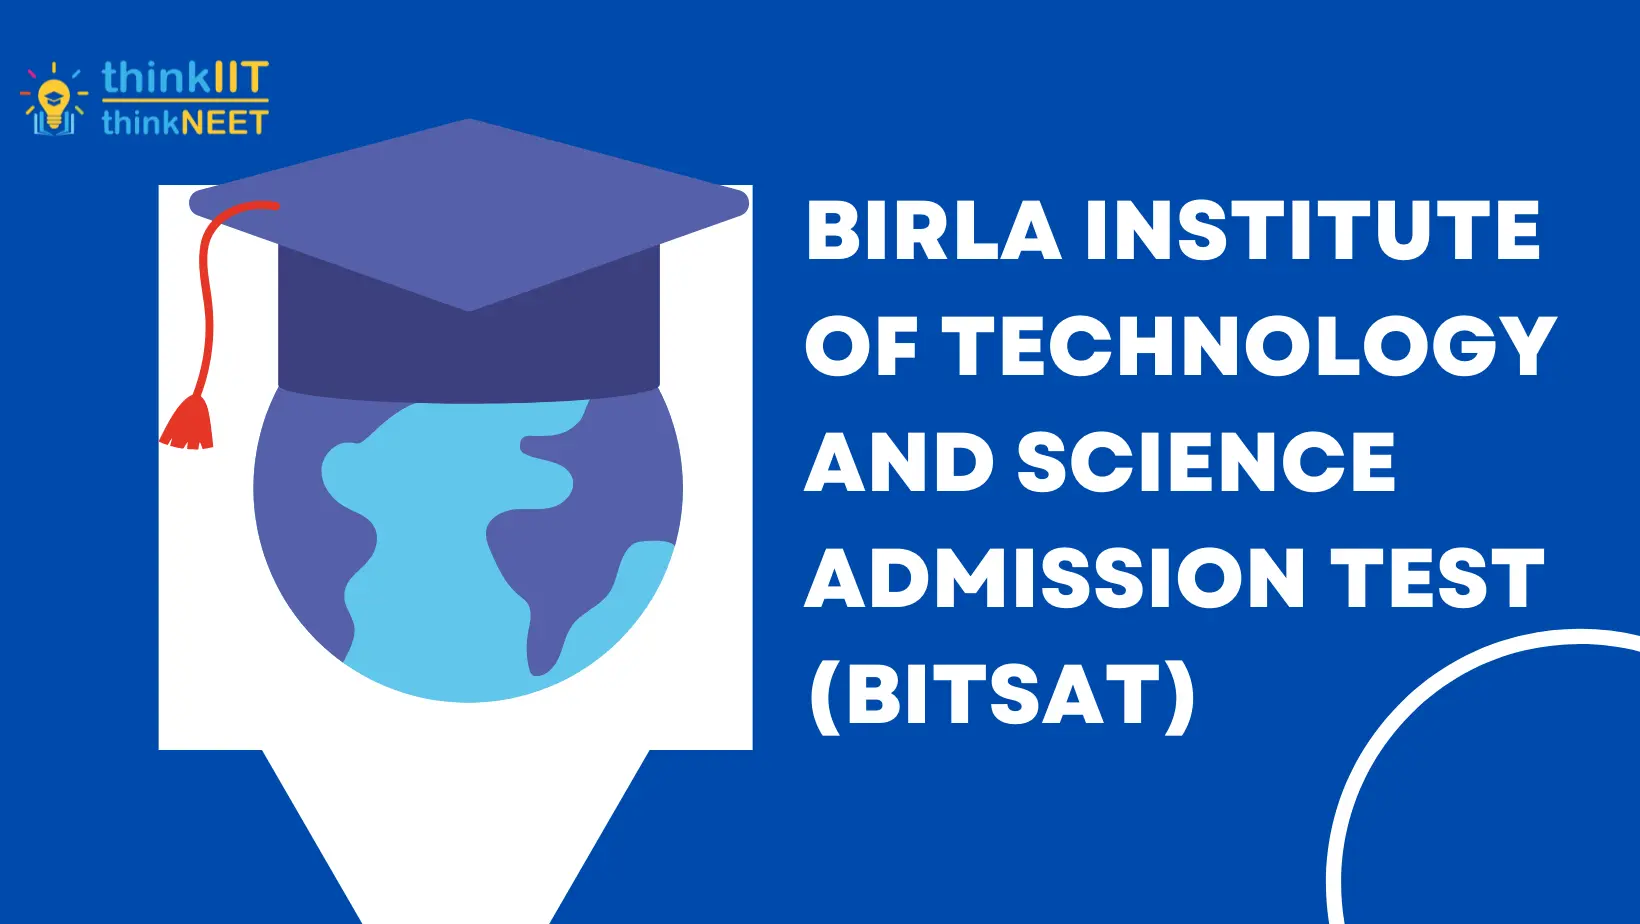 Birla Institute of Technology and Science Admission Test (BITSAT)